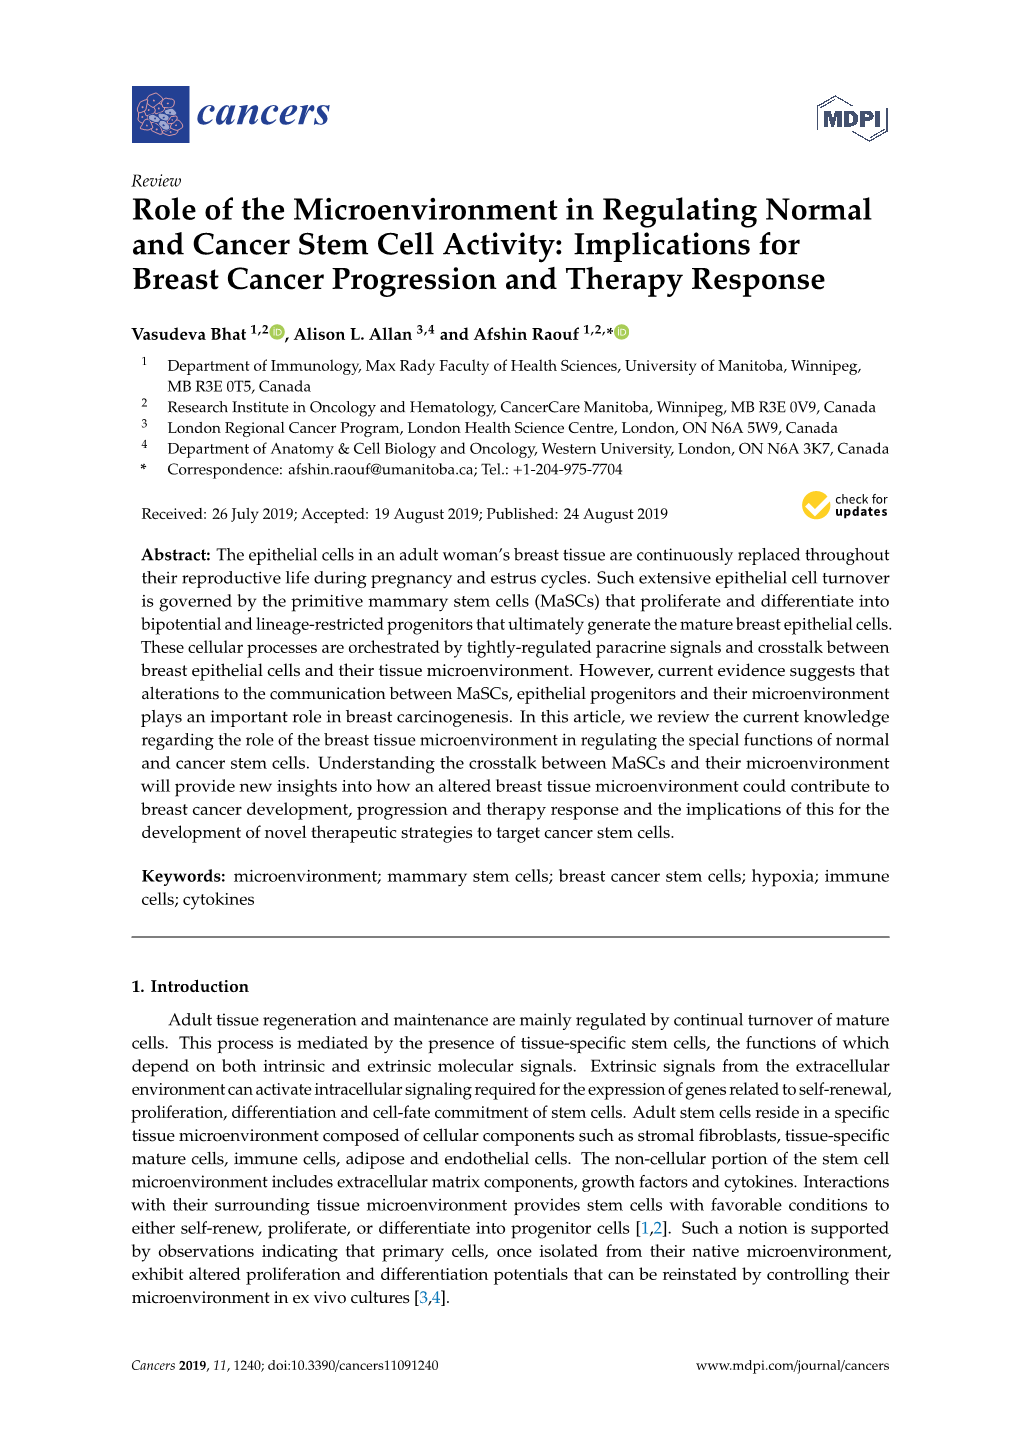 Role of the Microenvironment in Regulating Normal and Cancer Stem Cell Activity: Implications for Breast Cancer Progression and Therapy Response